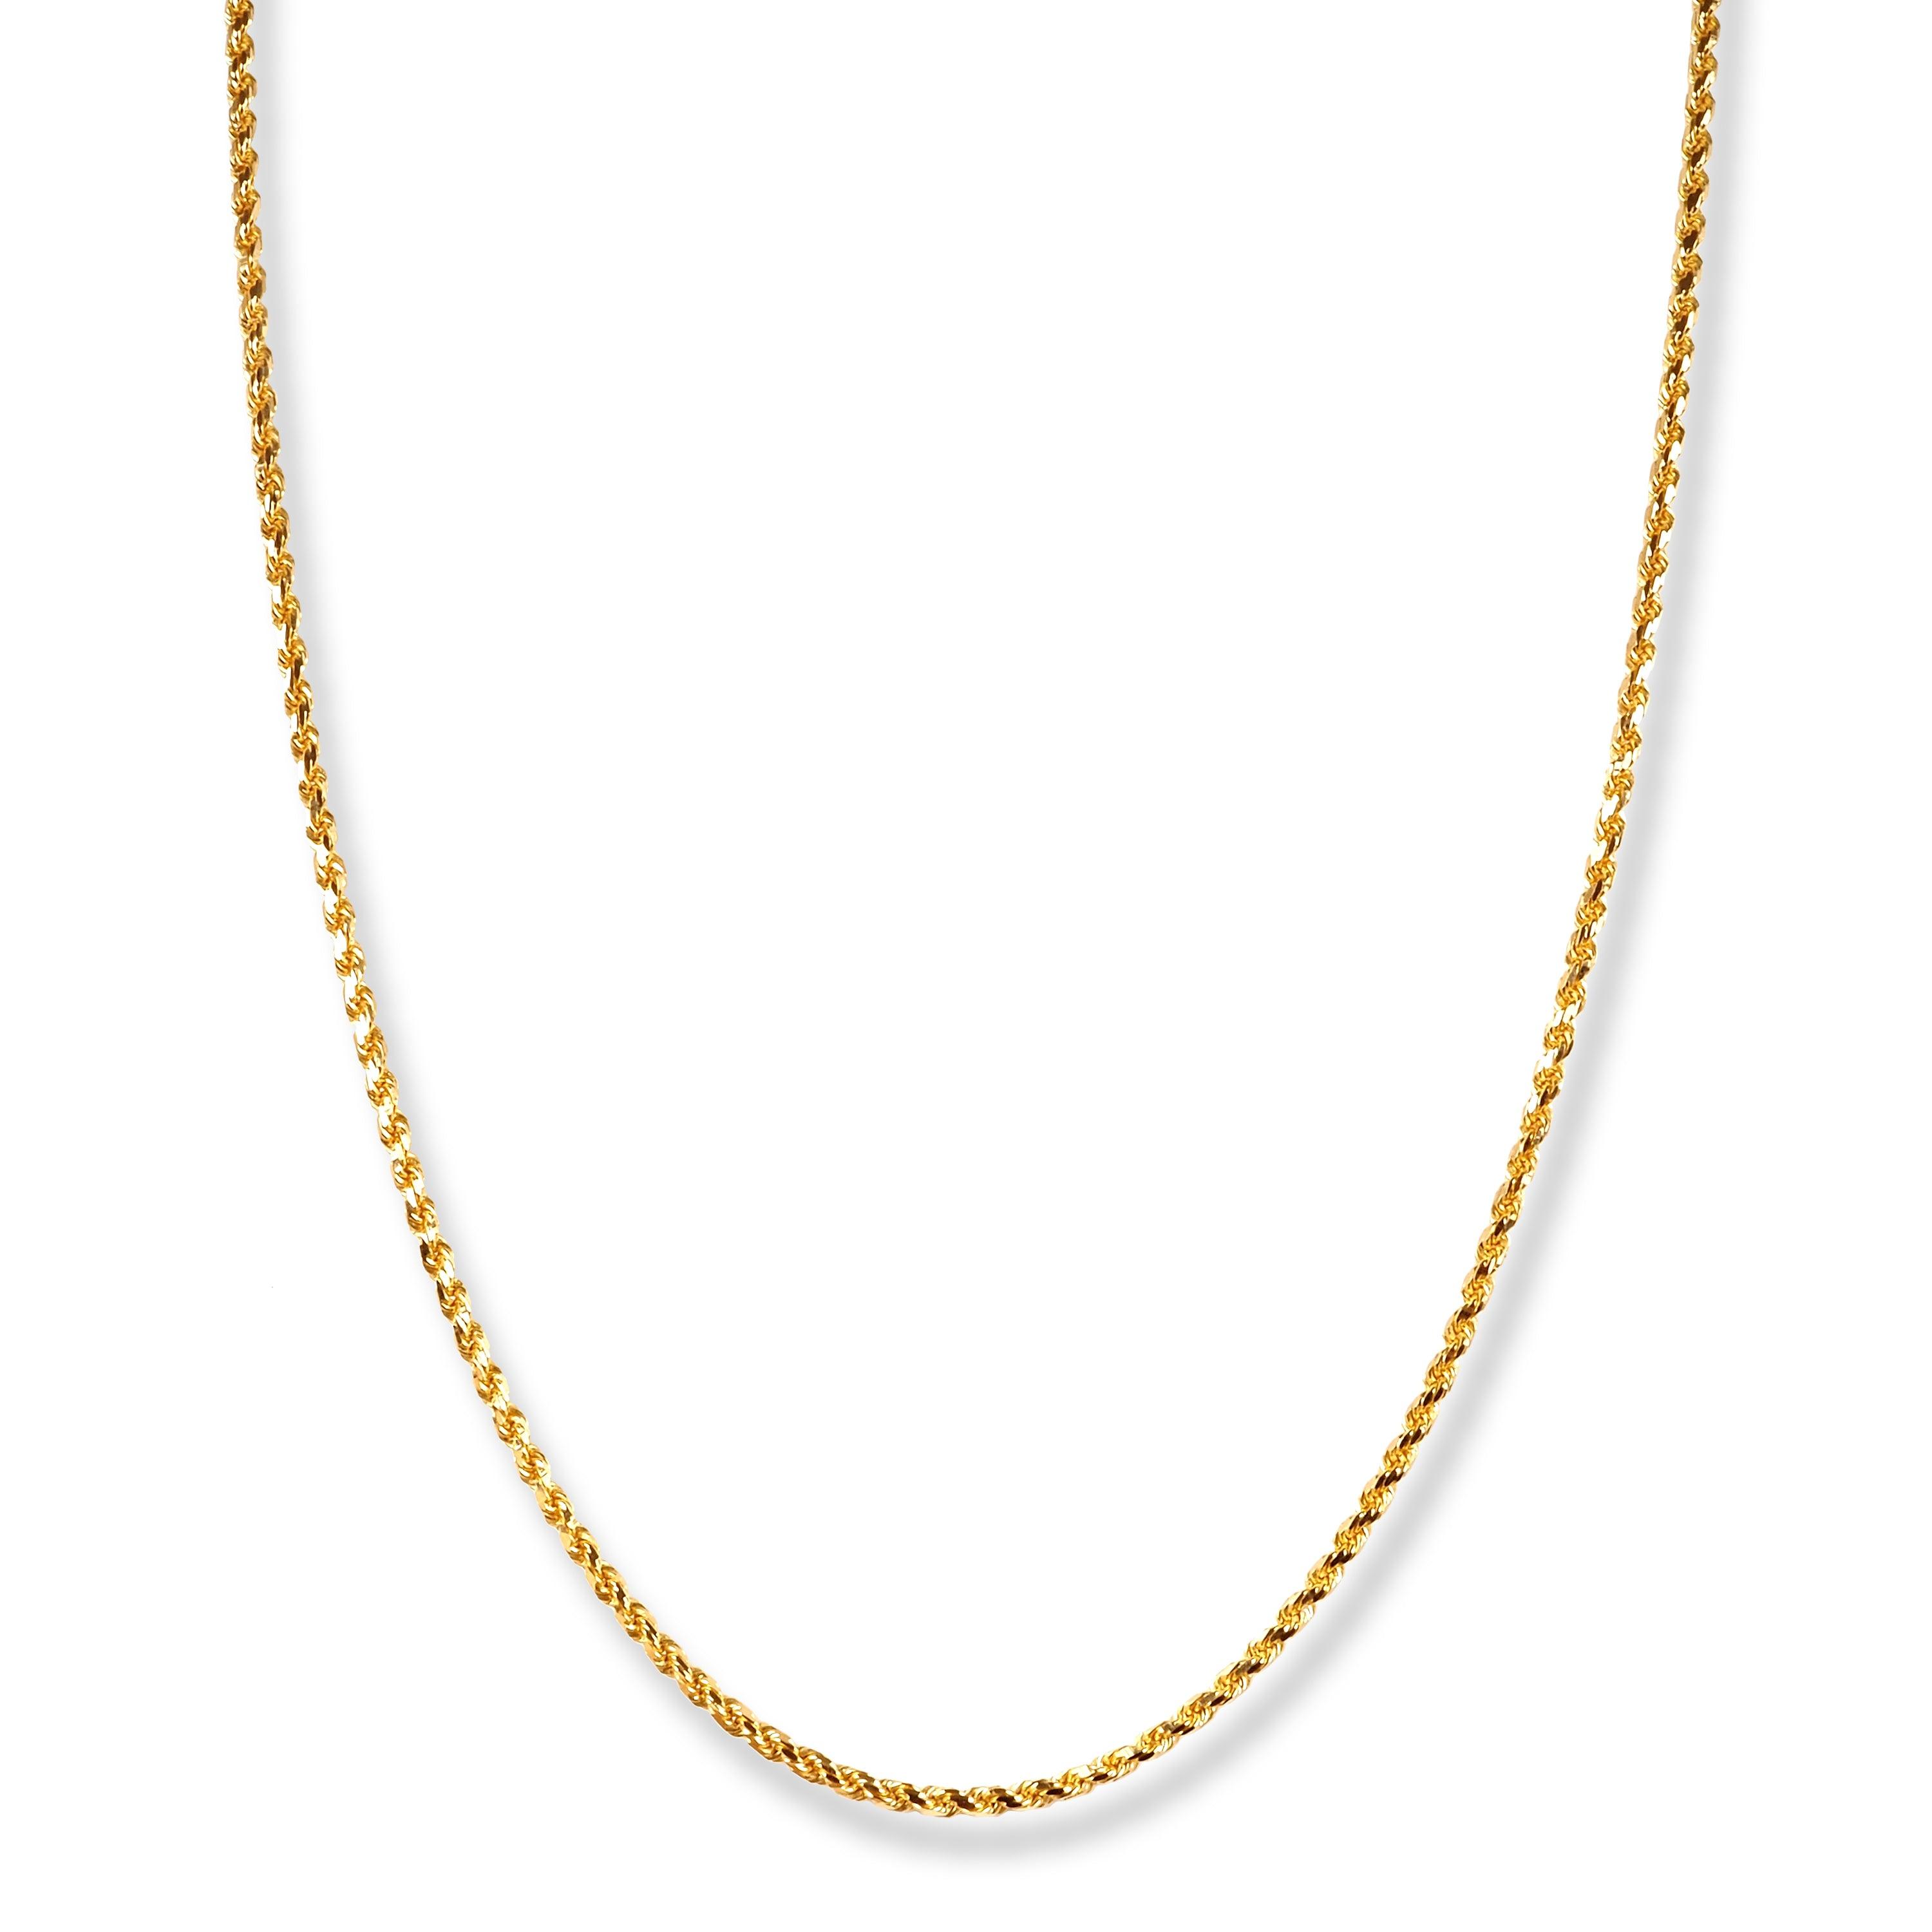 22ct Gold Filed Solid Rope Chain with Lobster Clasp C-1216 - Minar Jewellers